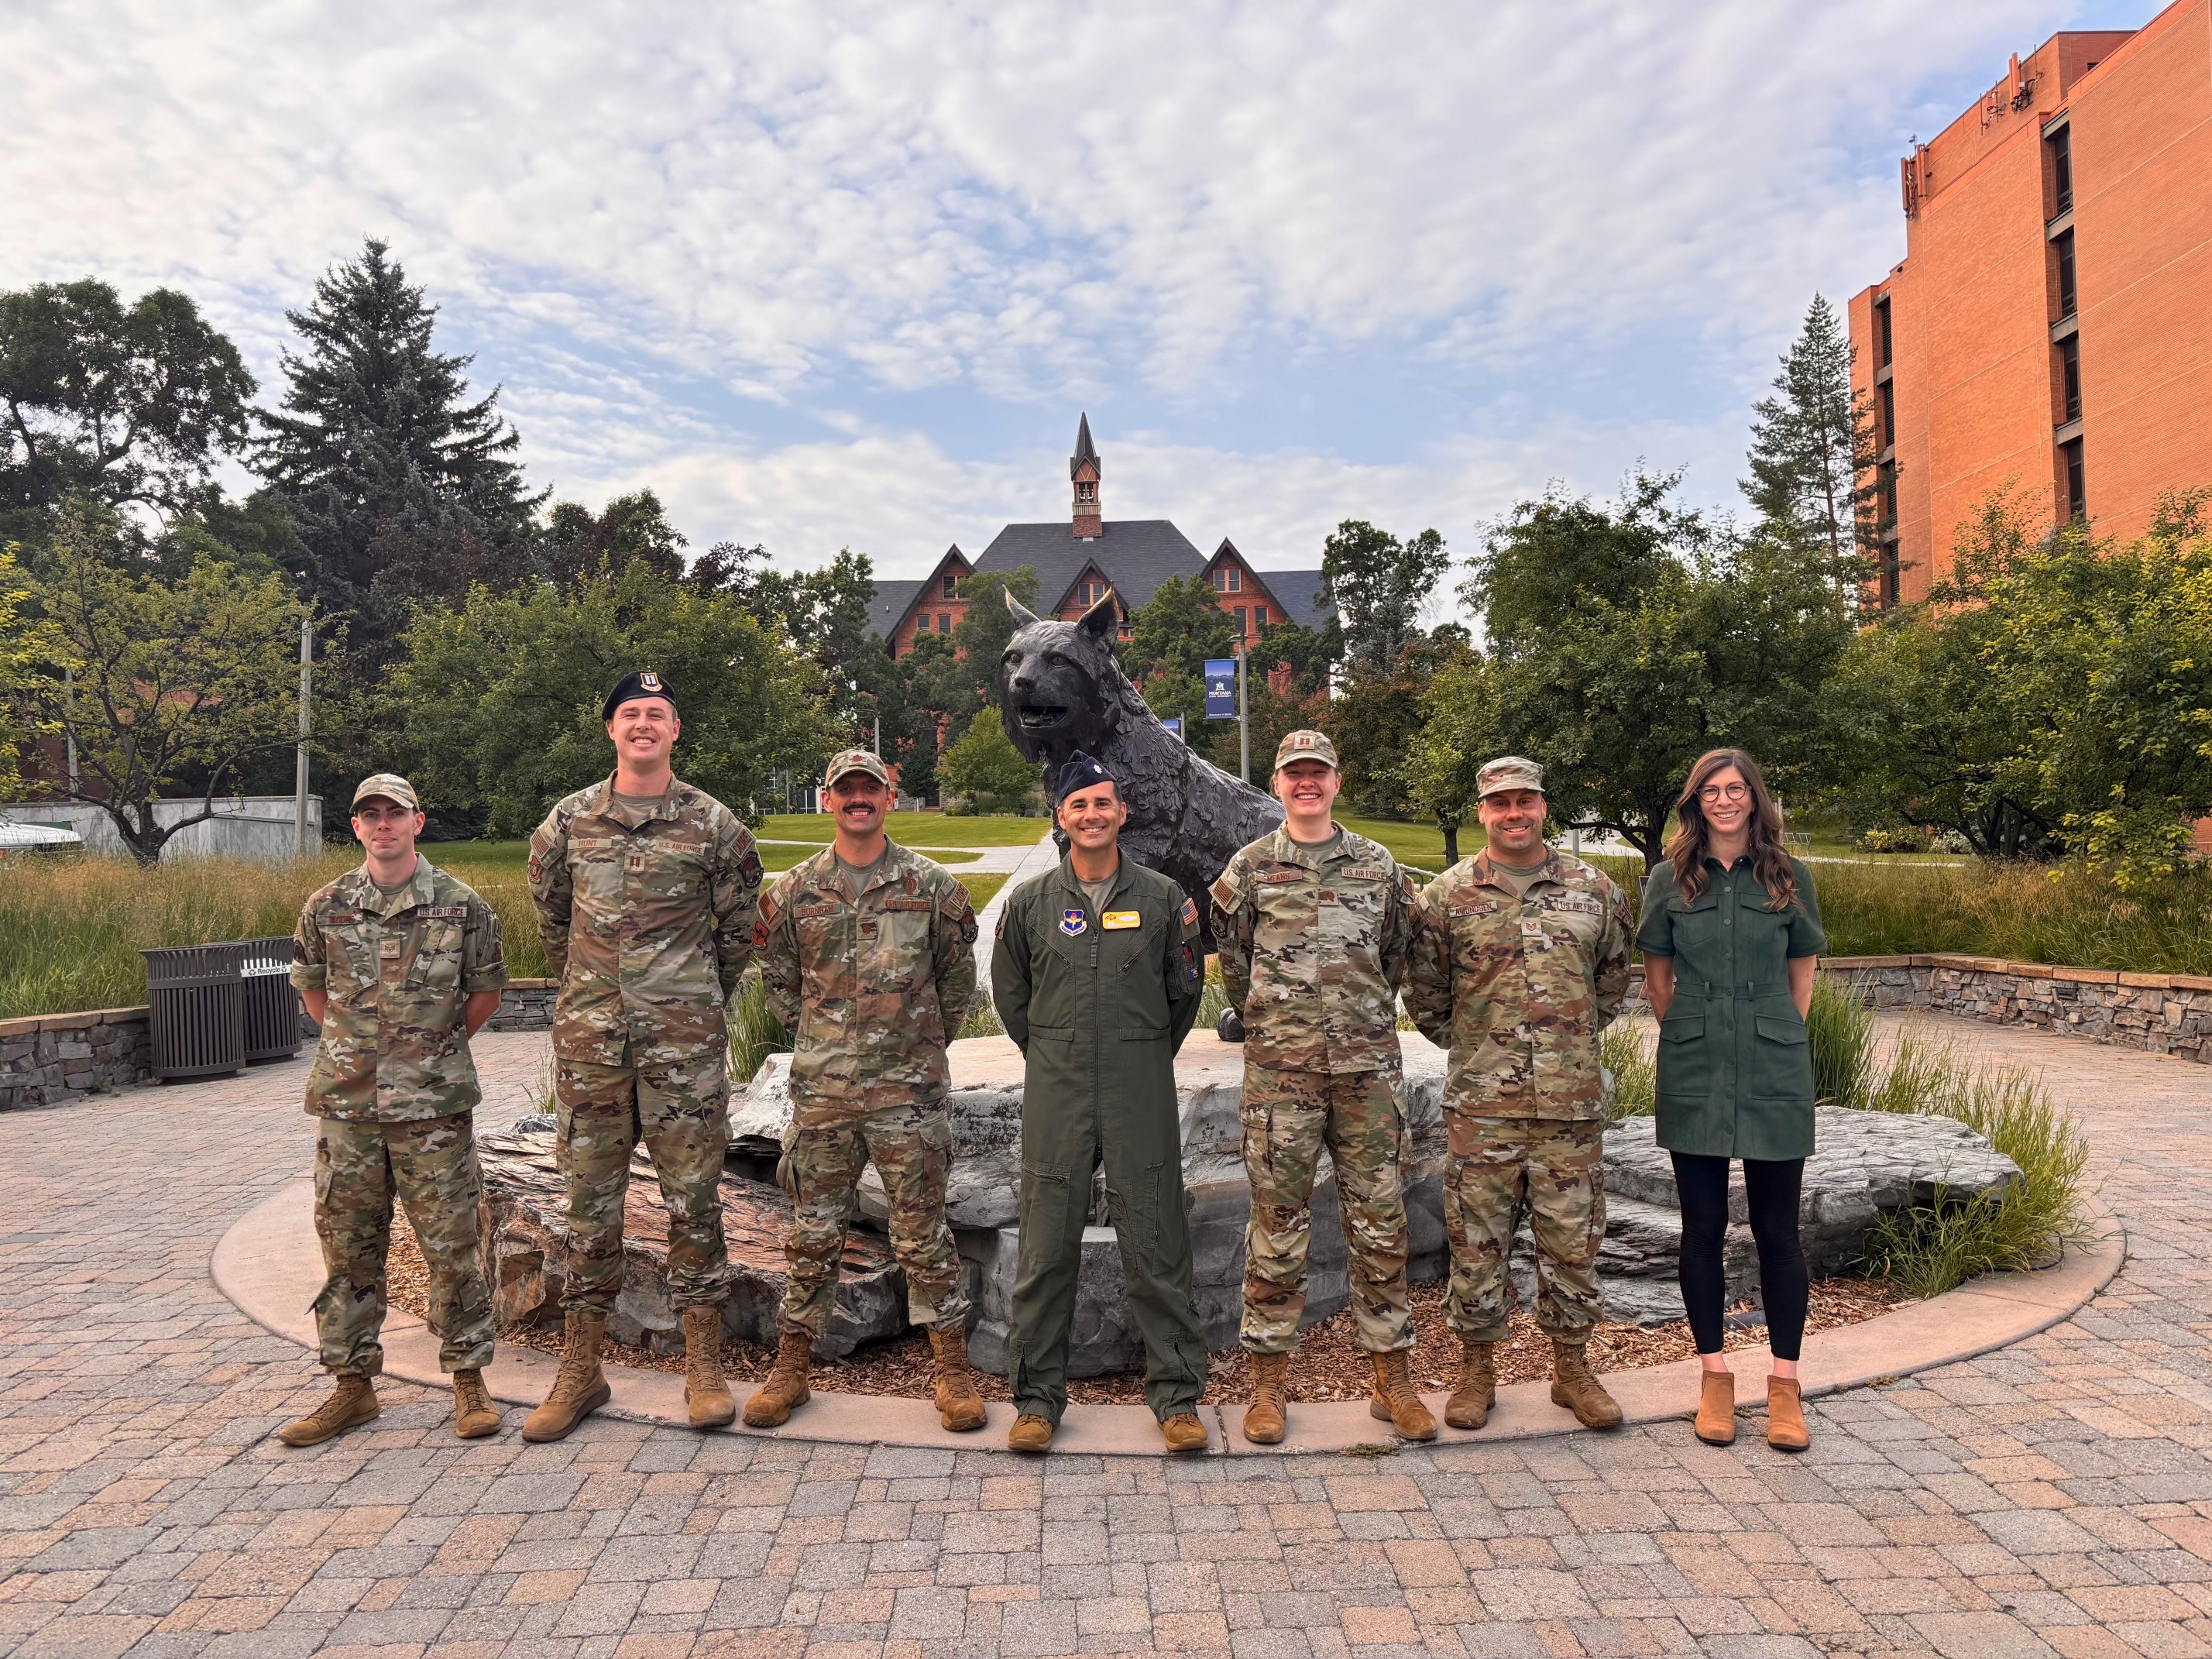 AFROTC Det 450 Cadre members in uniform standing in front of the Bobcat Statue at Montana State University